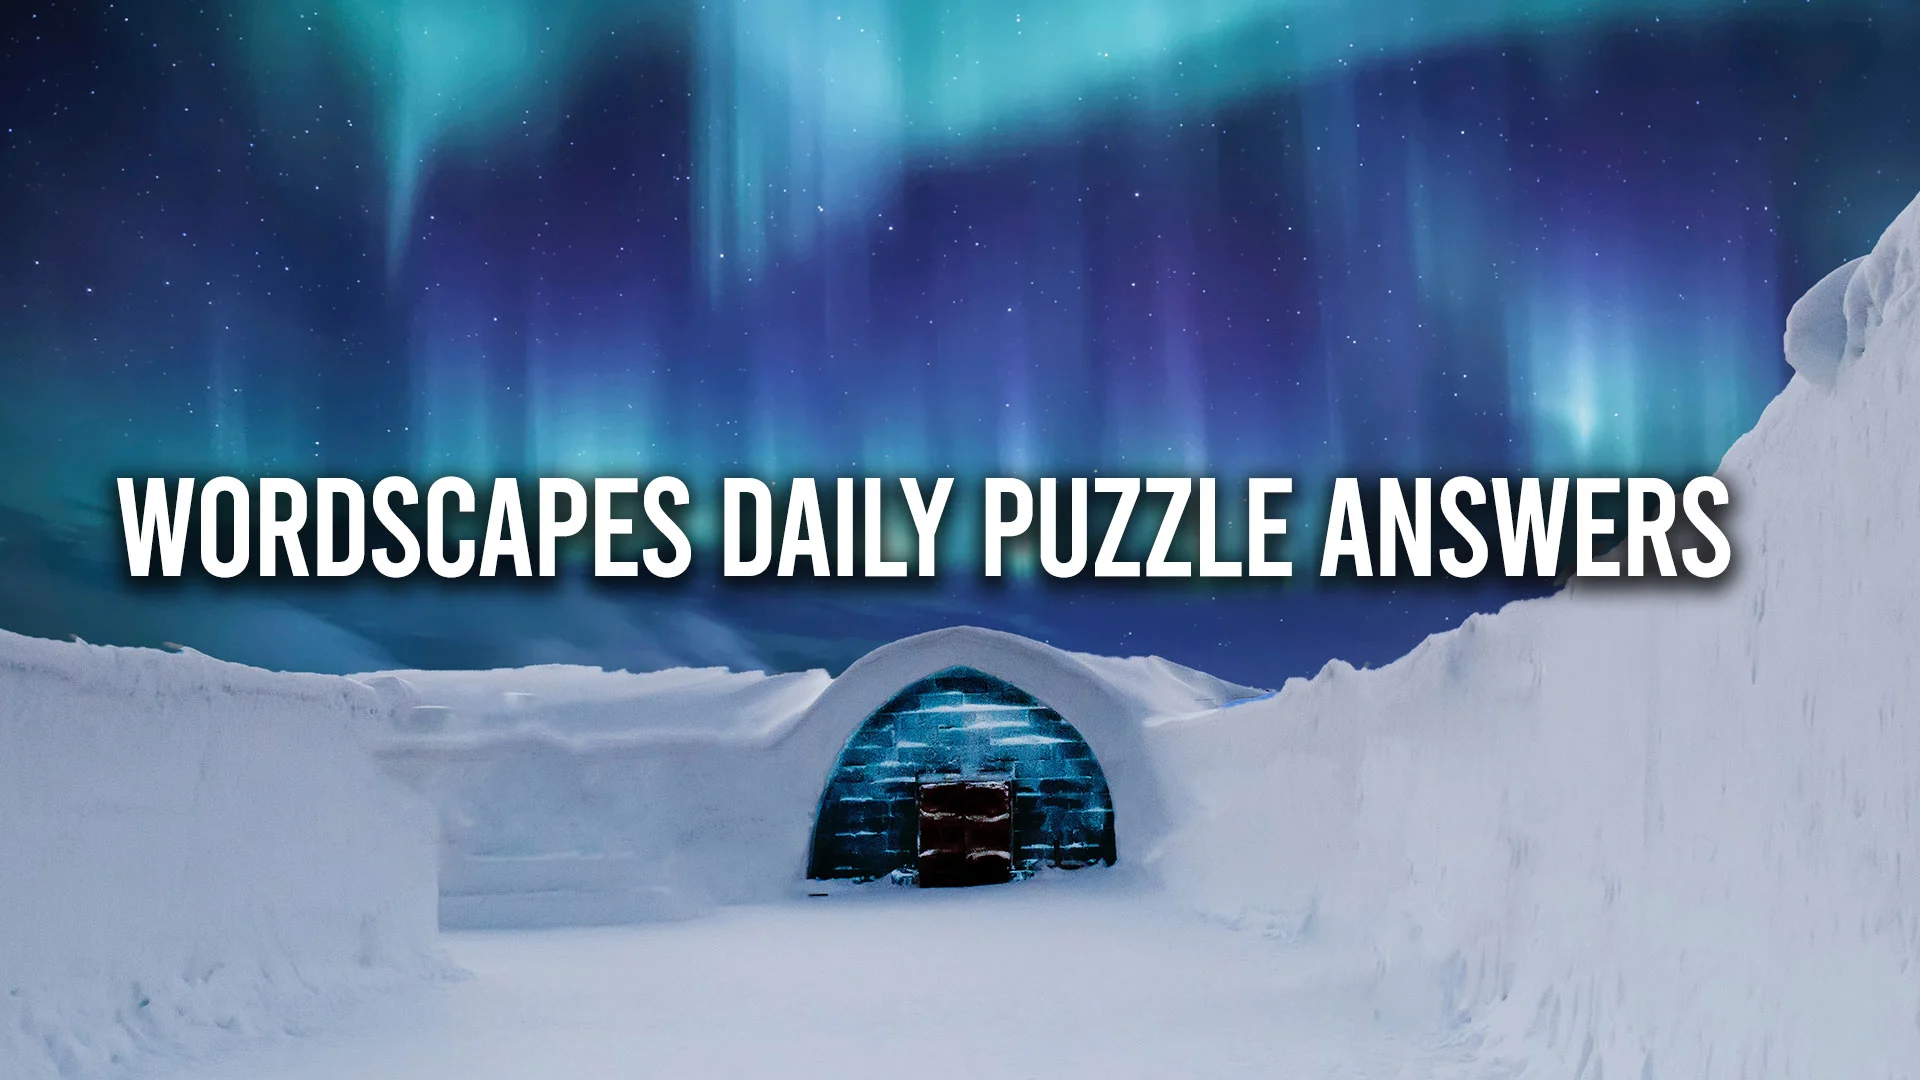 Wordscapes Daily Puzzle Answers for February 4 2023